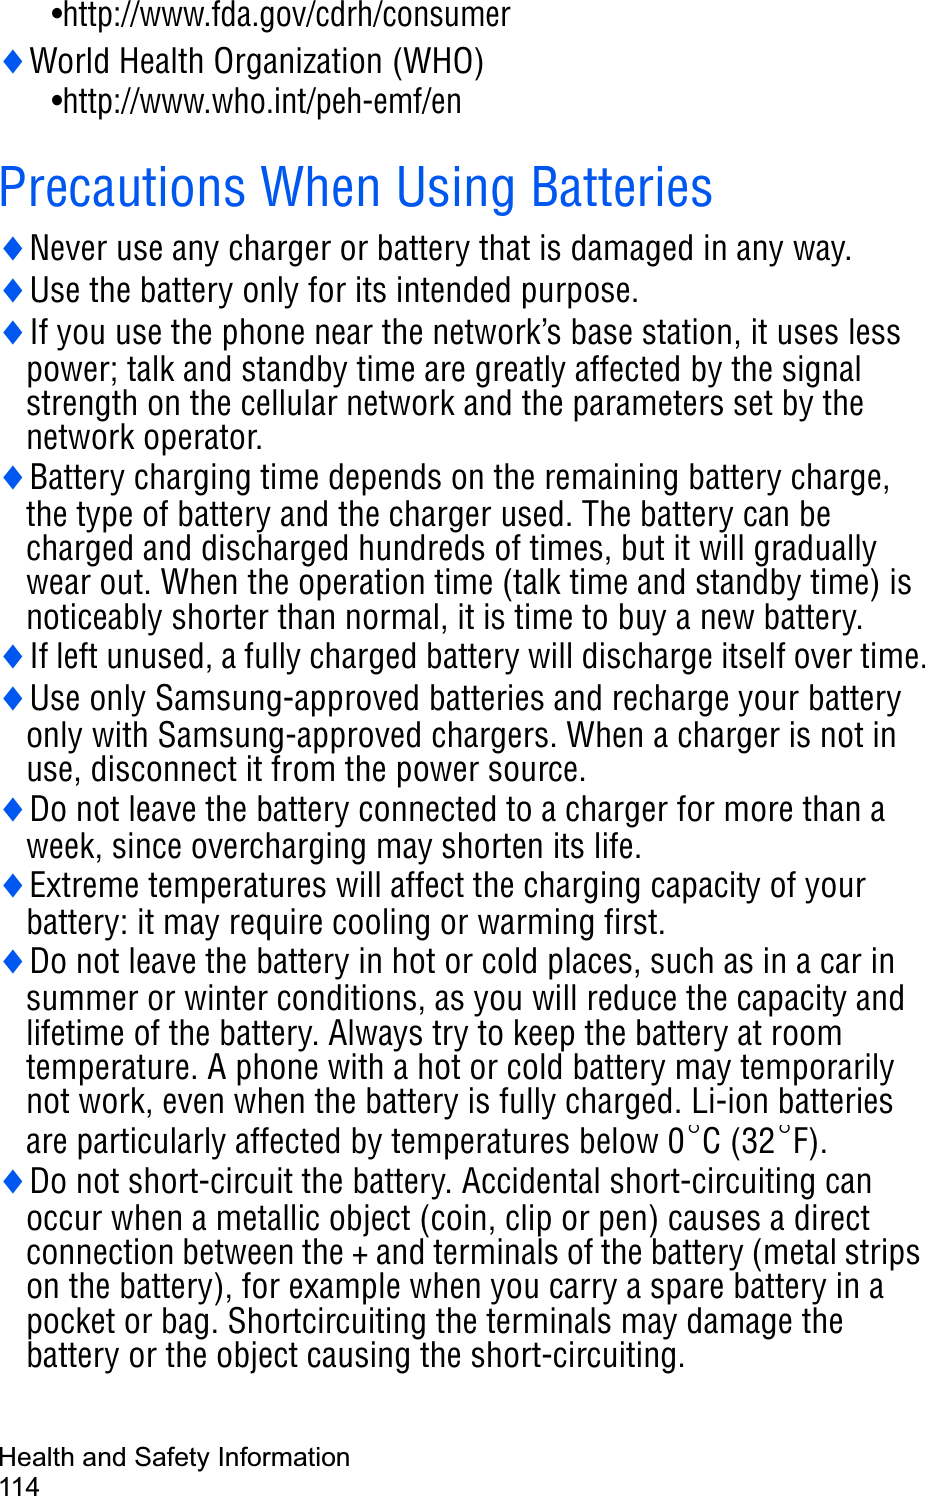 Health and Safety Information114•http://www.fda.gov/cdrh/consumeriWorld Health Organization (WHO)    •http://www.who.int/peh-emf/enPrecautions When Using BatteriesiNever use any charger or battery that is damaged in any way.iUse the battery only for its intended purpose.iIf you use the phone near the network’s base station, it uses less power; talk and standby time are greatly affected by the signal strength on the cellular network and the parameters set by the network operator.iBattery charging time depends on the remaining battery charge, the type of battery and the charger used. The battery can be charged and discharged hundreds of times, but it will gradually wear out. When the operation time (talk time and standby time) is noticeably shorter than normal, it is time to buy a new battery.iIf left unused, a fully charged battery will discharge itself over time.iUse only Samsung-approved batteries and recharge your battery only with Samsung-approved chargers. When a charger is not in use, disconnect it from the power source.iDo not leave the battery connected to a charger for more than a week, since overcharging may shorten its life.iExtreme temperatures will affect the charging capacity of your battery: it may require cooling or warming first.iDo not leave the battery in hot or cold places, such as in a car in summer or winter conditions, as you will reduce the capacity and lifetime of the battery. Always try to keep the battery at room temperature. A phone with a hot or cold battery may temporarily not work, even when the battery is fully charged. Li-ion batteries are particularly affected by temperatures below 0 C (32 F).iDo not short-circuit the battery. Accidental short-circuiting can occur when a metallic object (coin, clip or pen) causes a direct connection between the + and terminals of the battery (metal strips on the battery), for example when you carry a spare battery in a pocket or bag. Shortcircuiting the terminals may damage the battery or the object causing the short-circuiting.qq